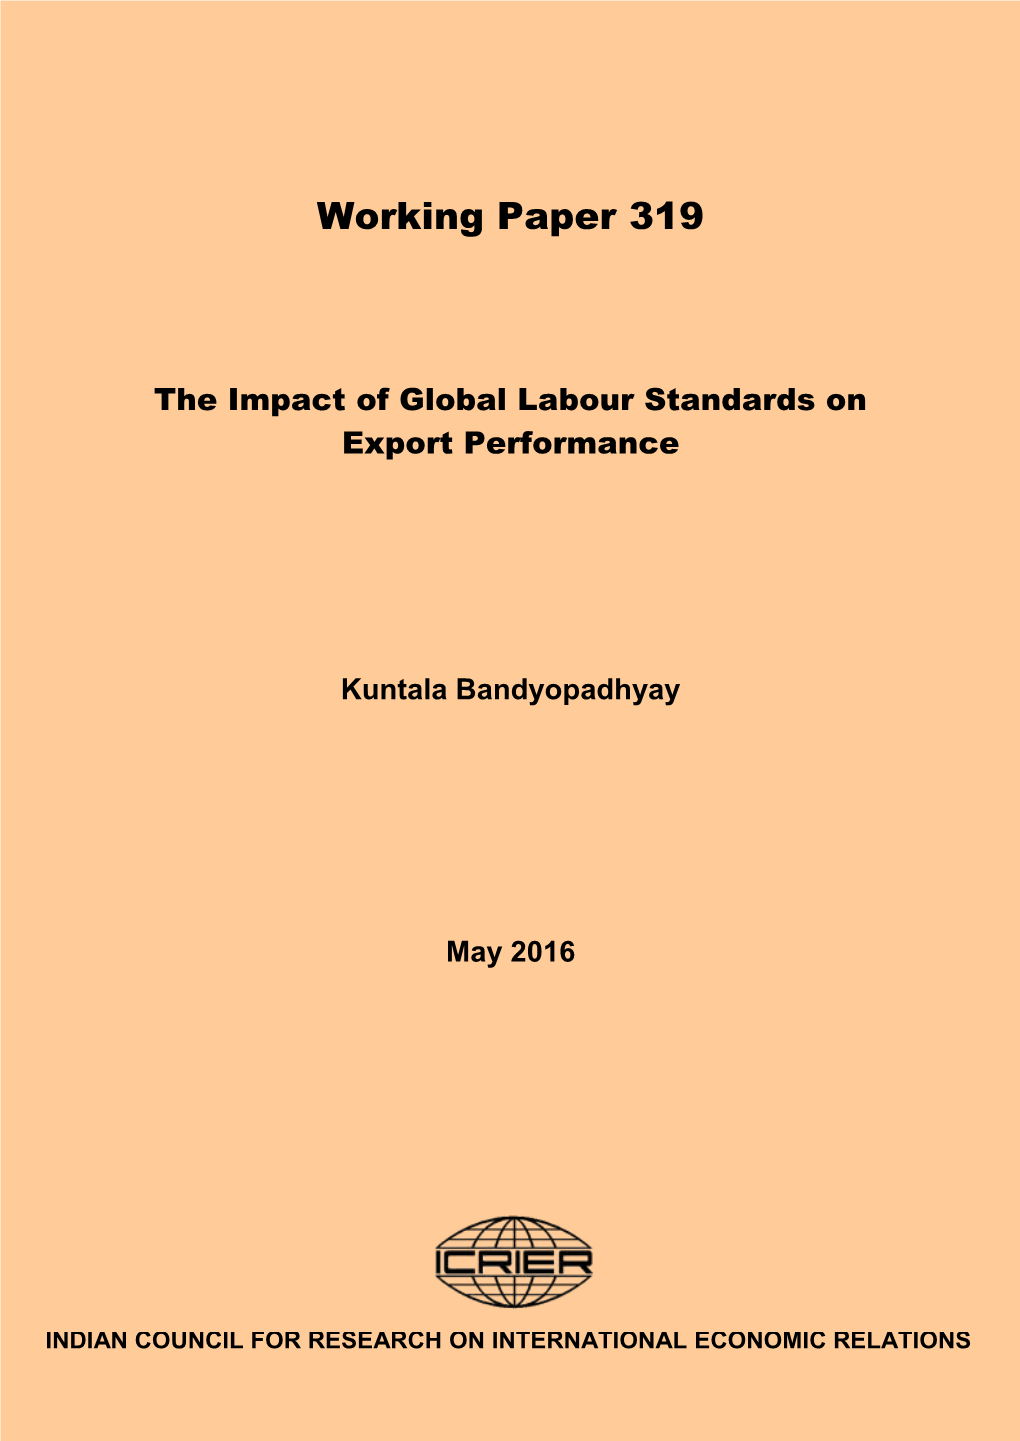 The Impact of Global Labour Standards on Export Performance